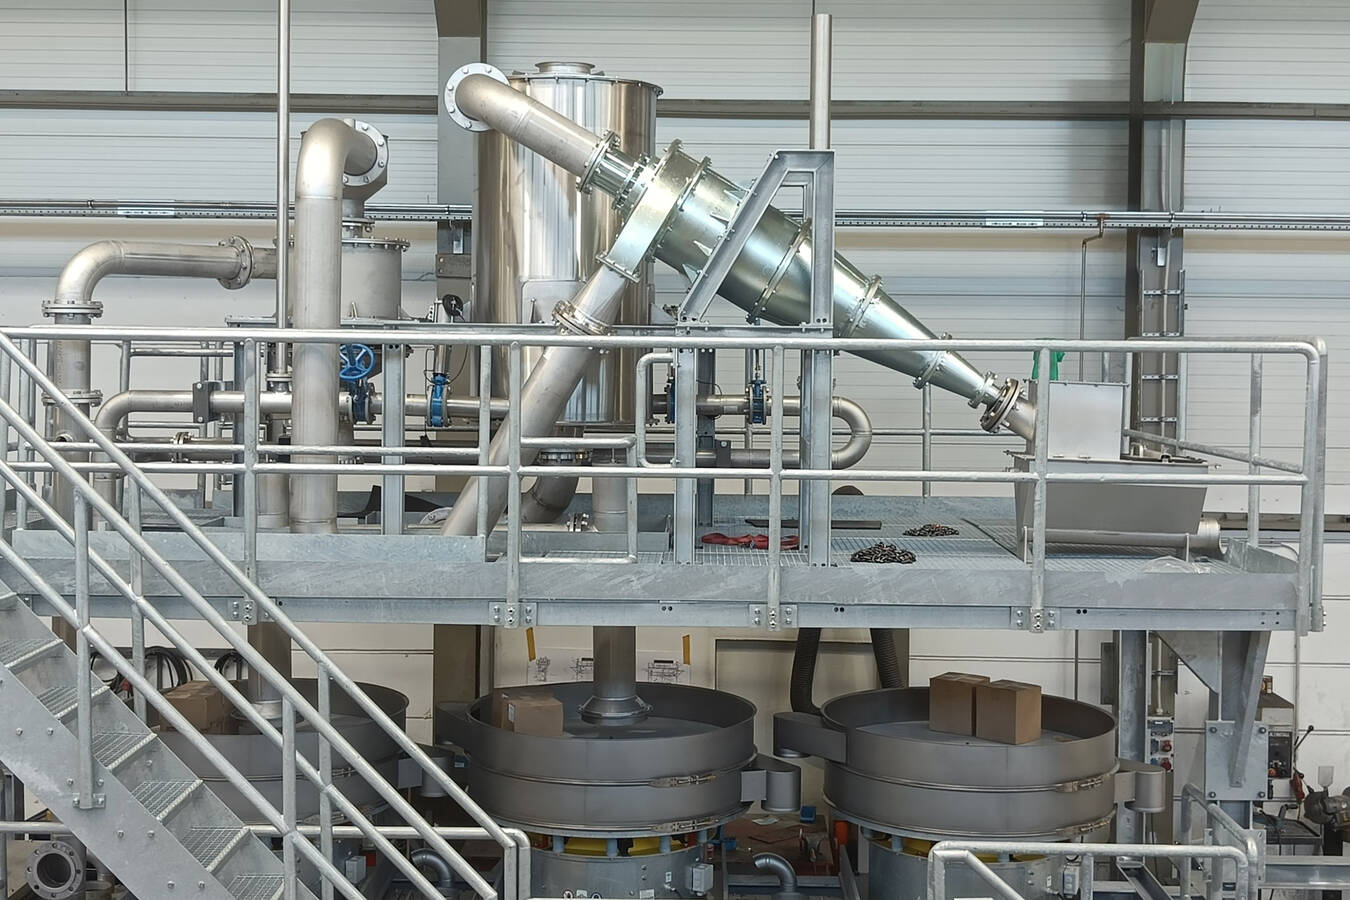 100 metric tons of PET recyclate per day Herbold Meckesheim supplies fifth PET washing line to Türkiye – Doğa will produce rPET flakes for bottle-to-bottle applications